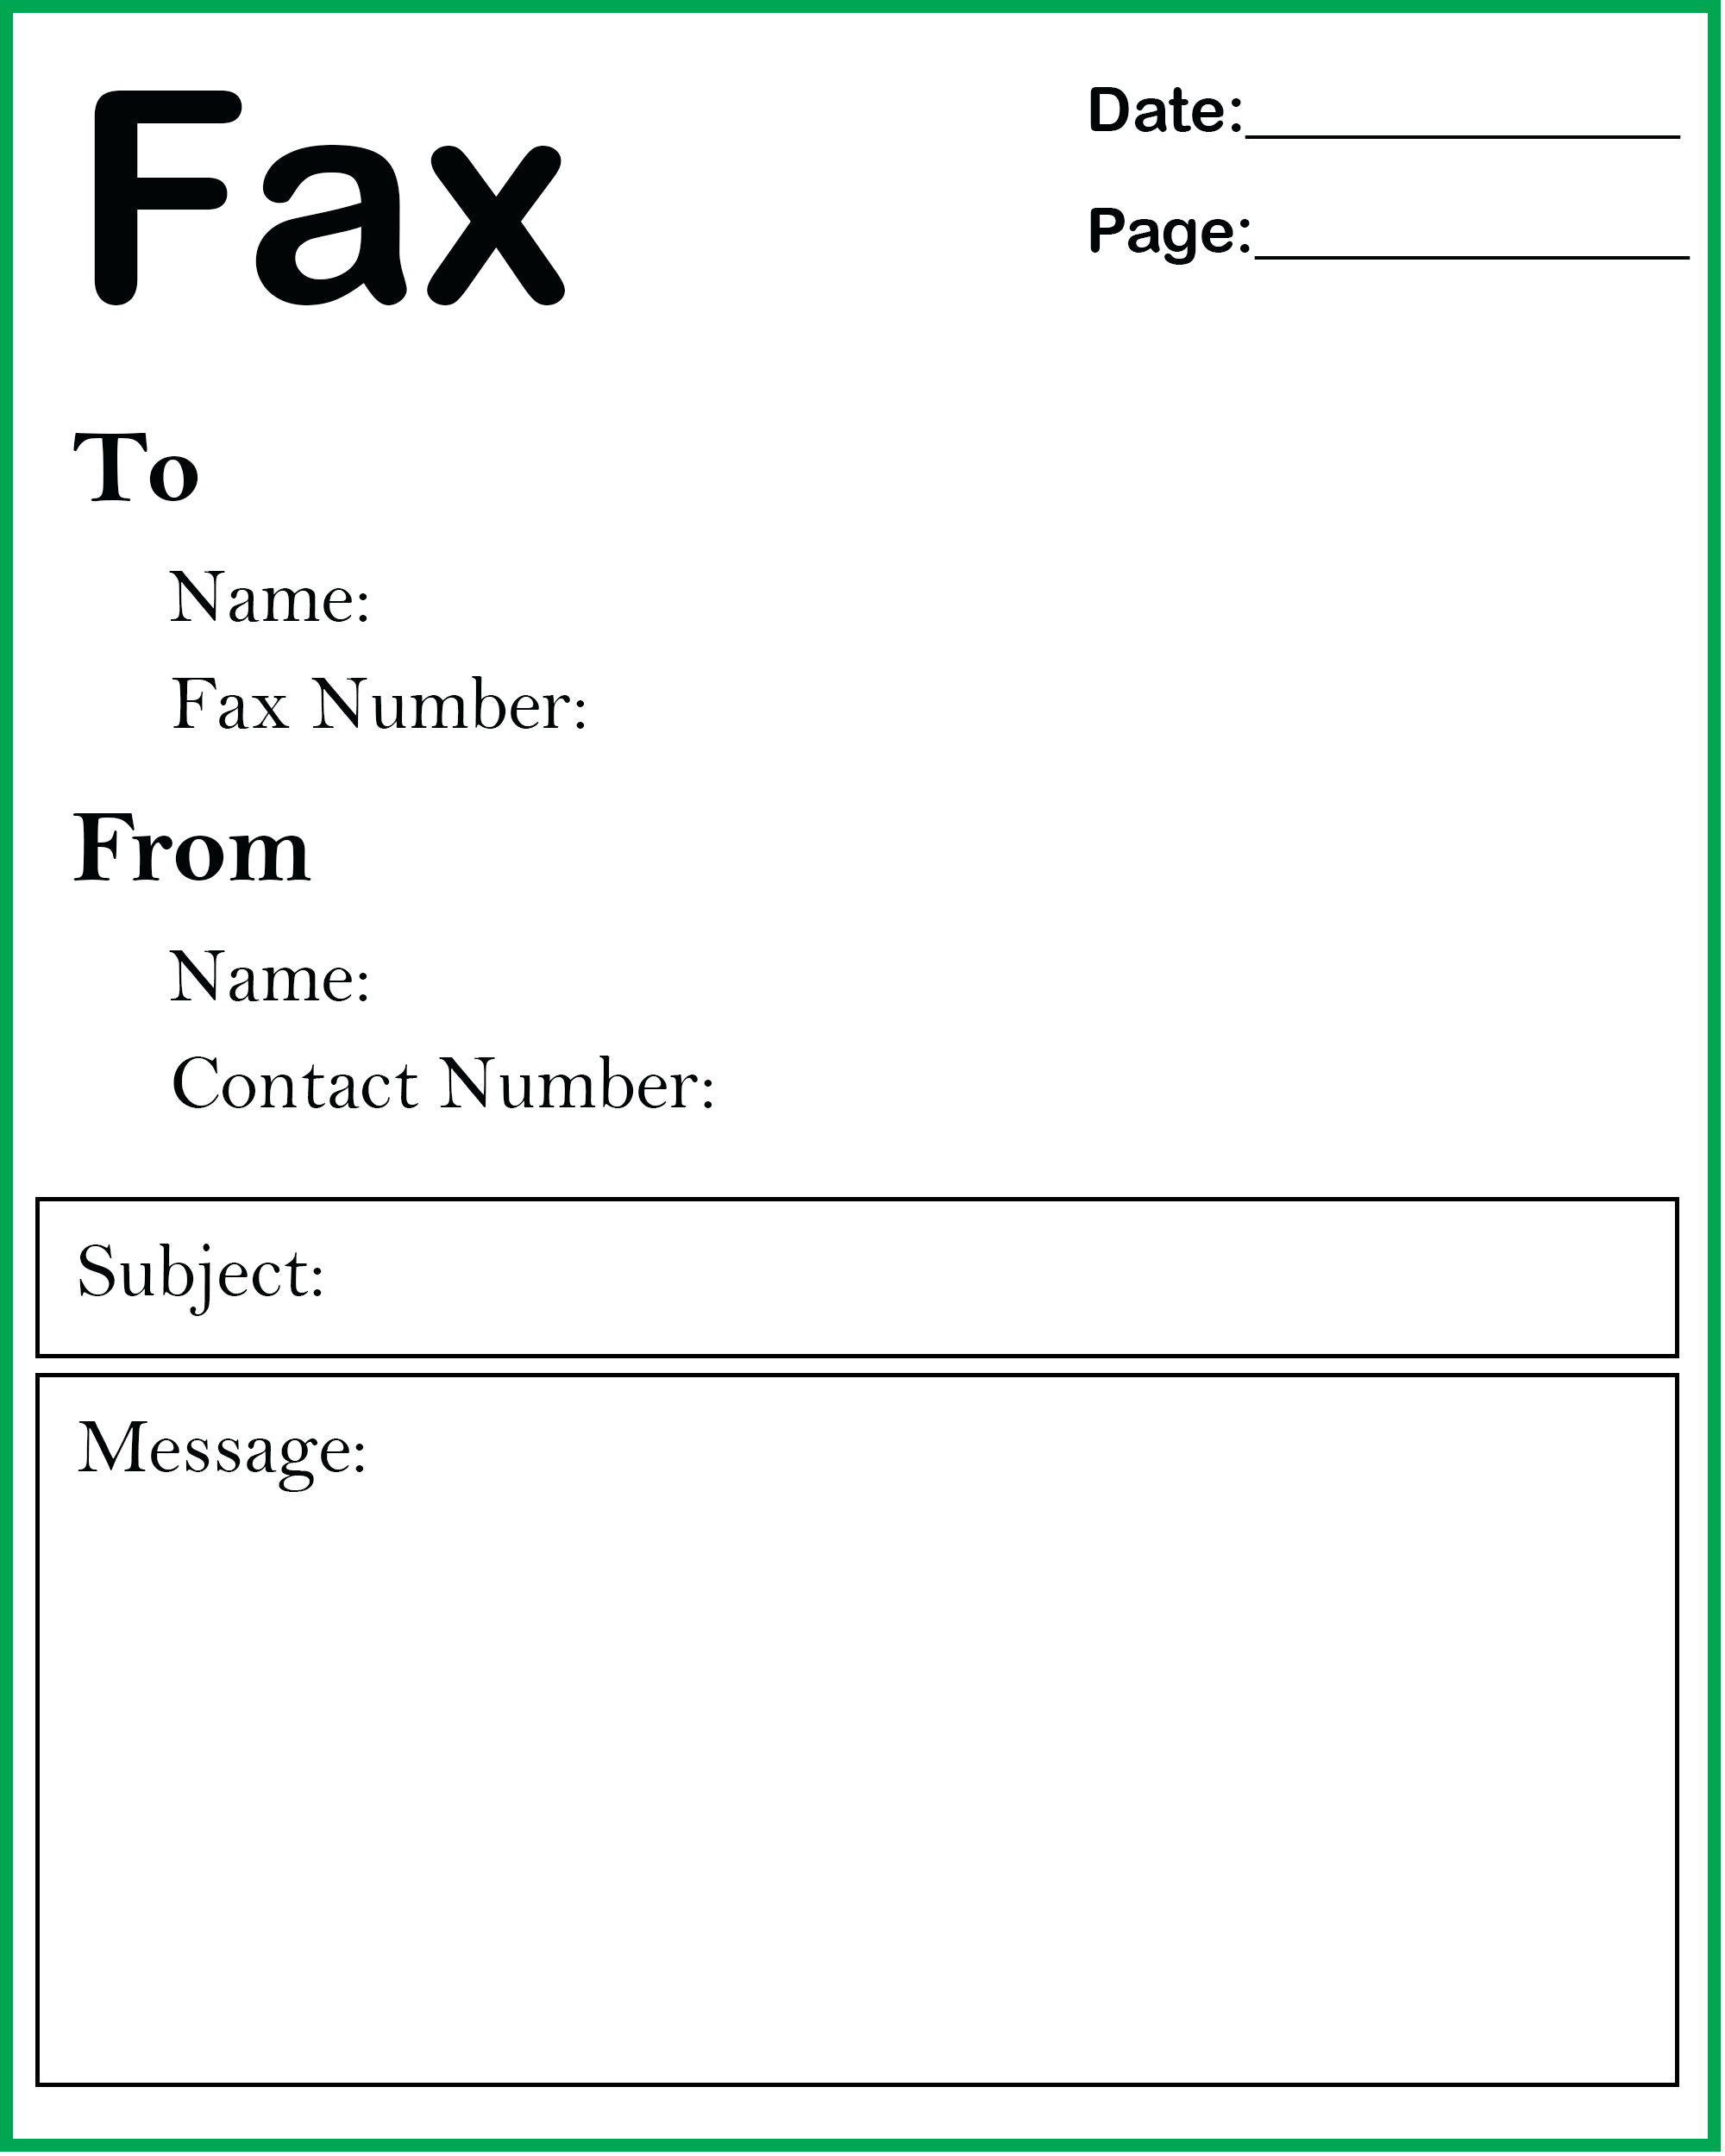 Free Basic Fax Cover Sheet Template {PDF, Word} Fax Cover Sheet